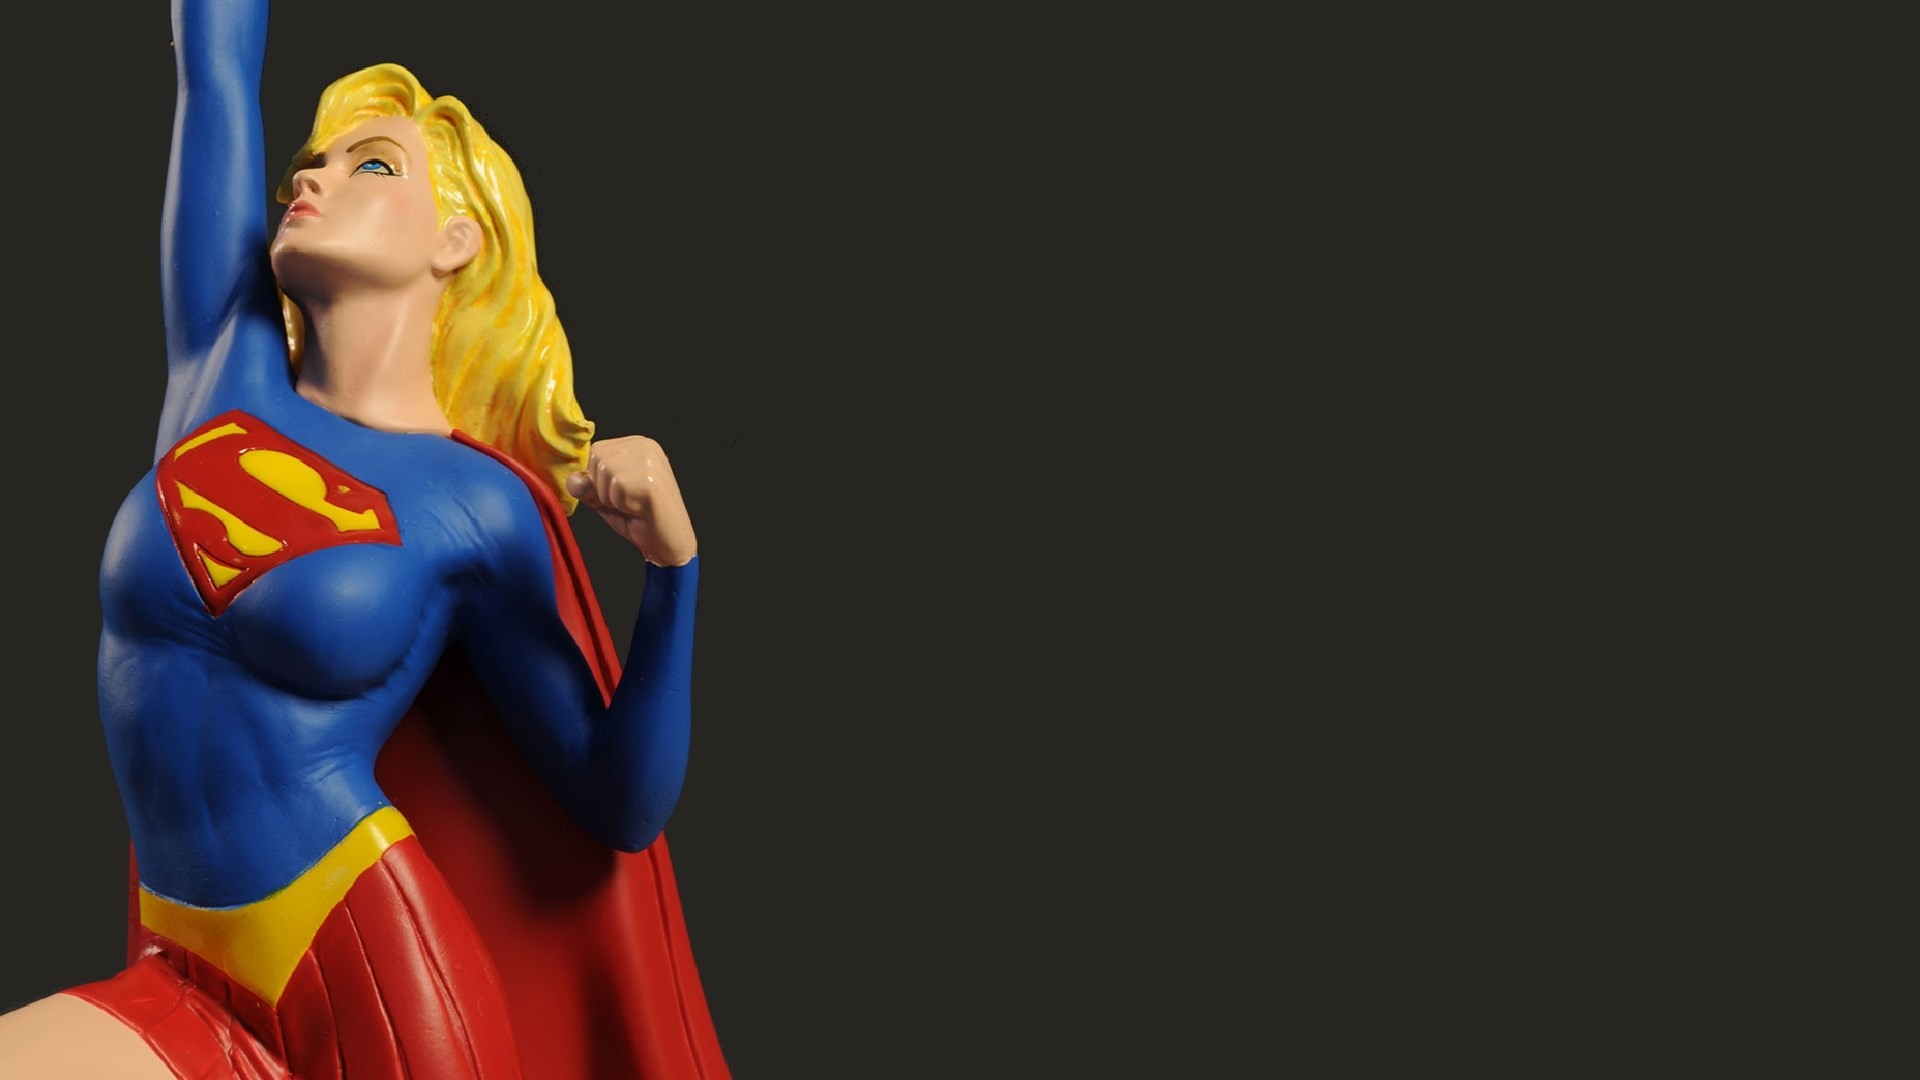 1920x1080 supergirl pic: Full HD Pictures,  (107 kB)